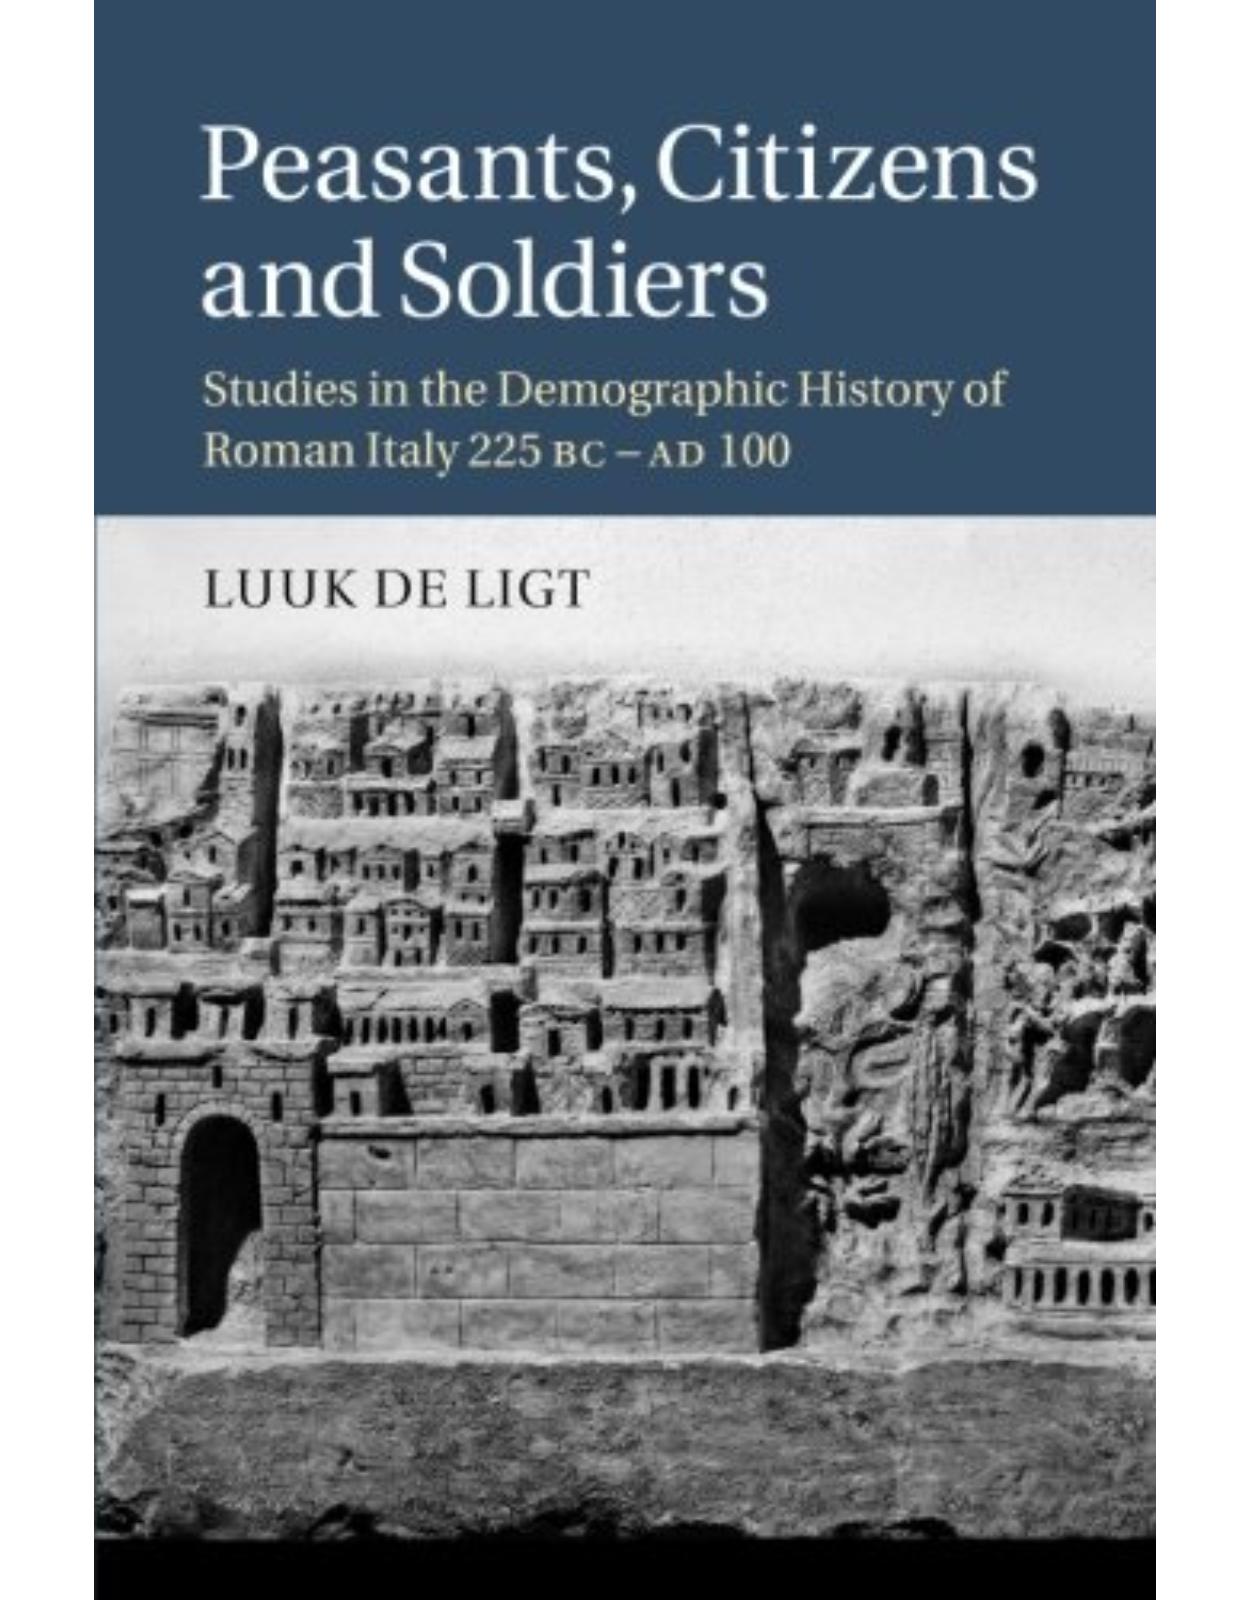 Peasants, Citizens and Soldiers: Studies in the Demographic History of Roman Italy 225 BC-AD 100